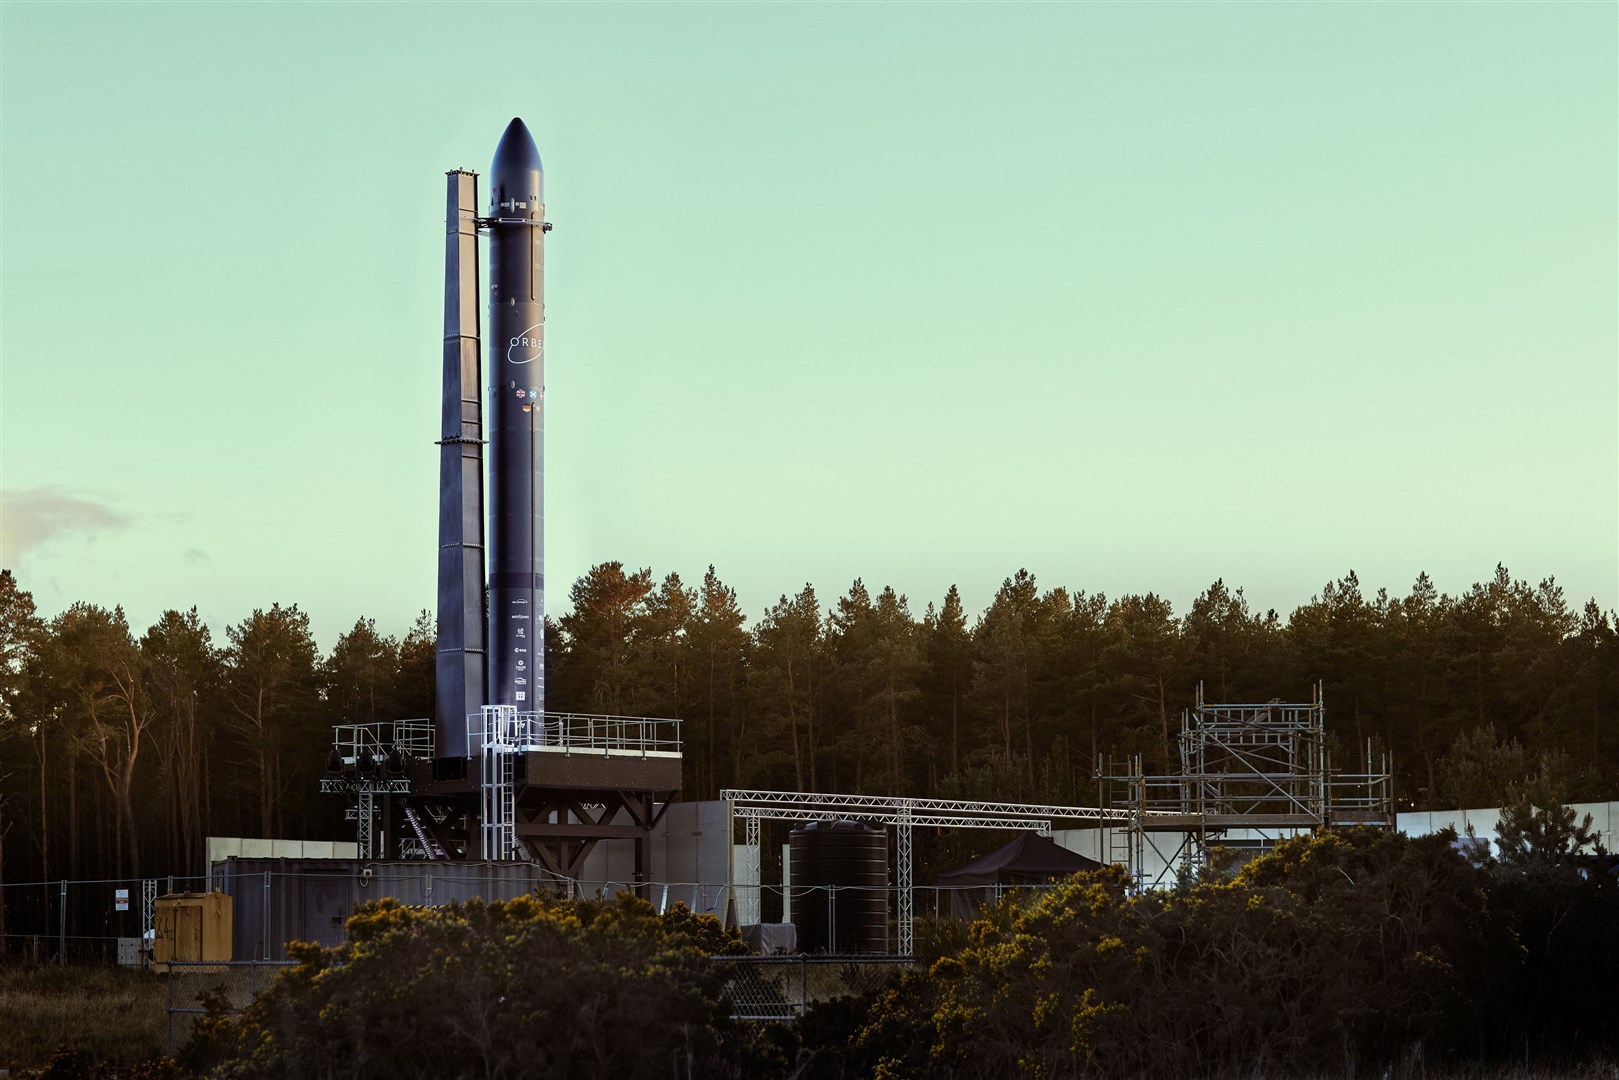 The Orbex Prime rocket at a Kinloss test stand.